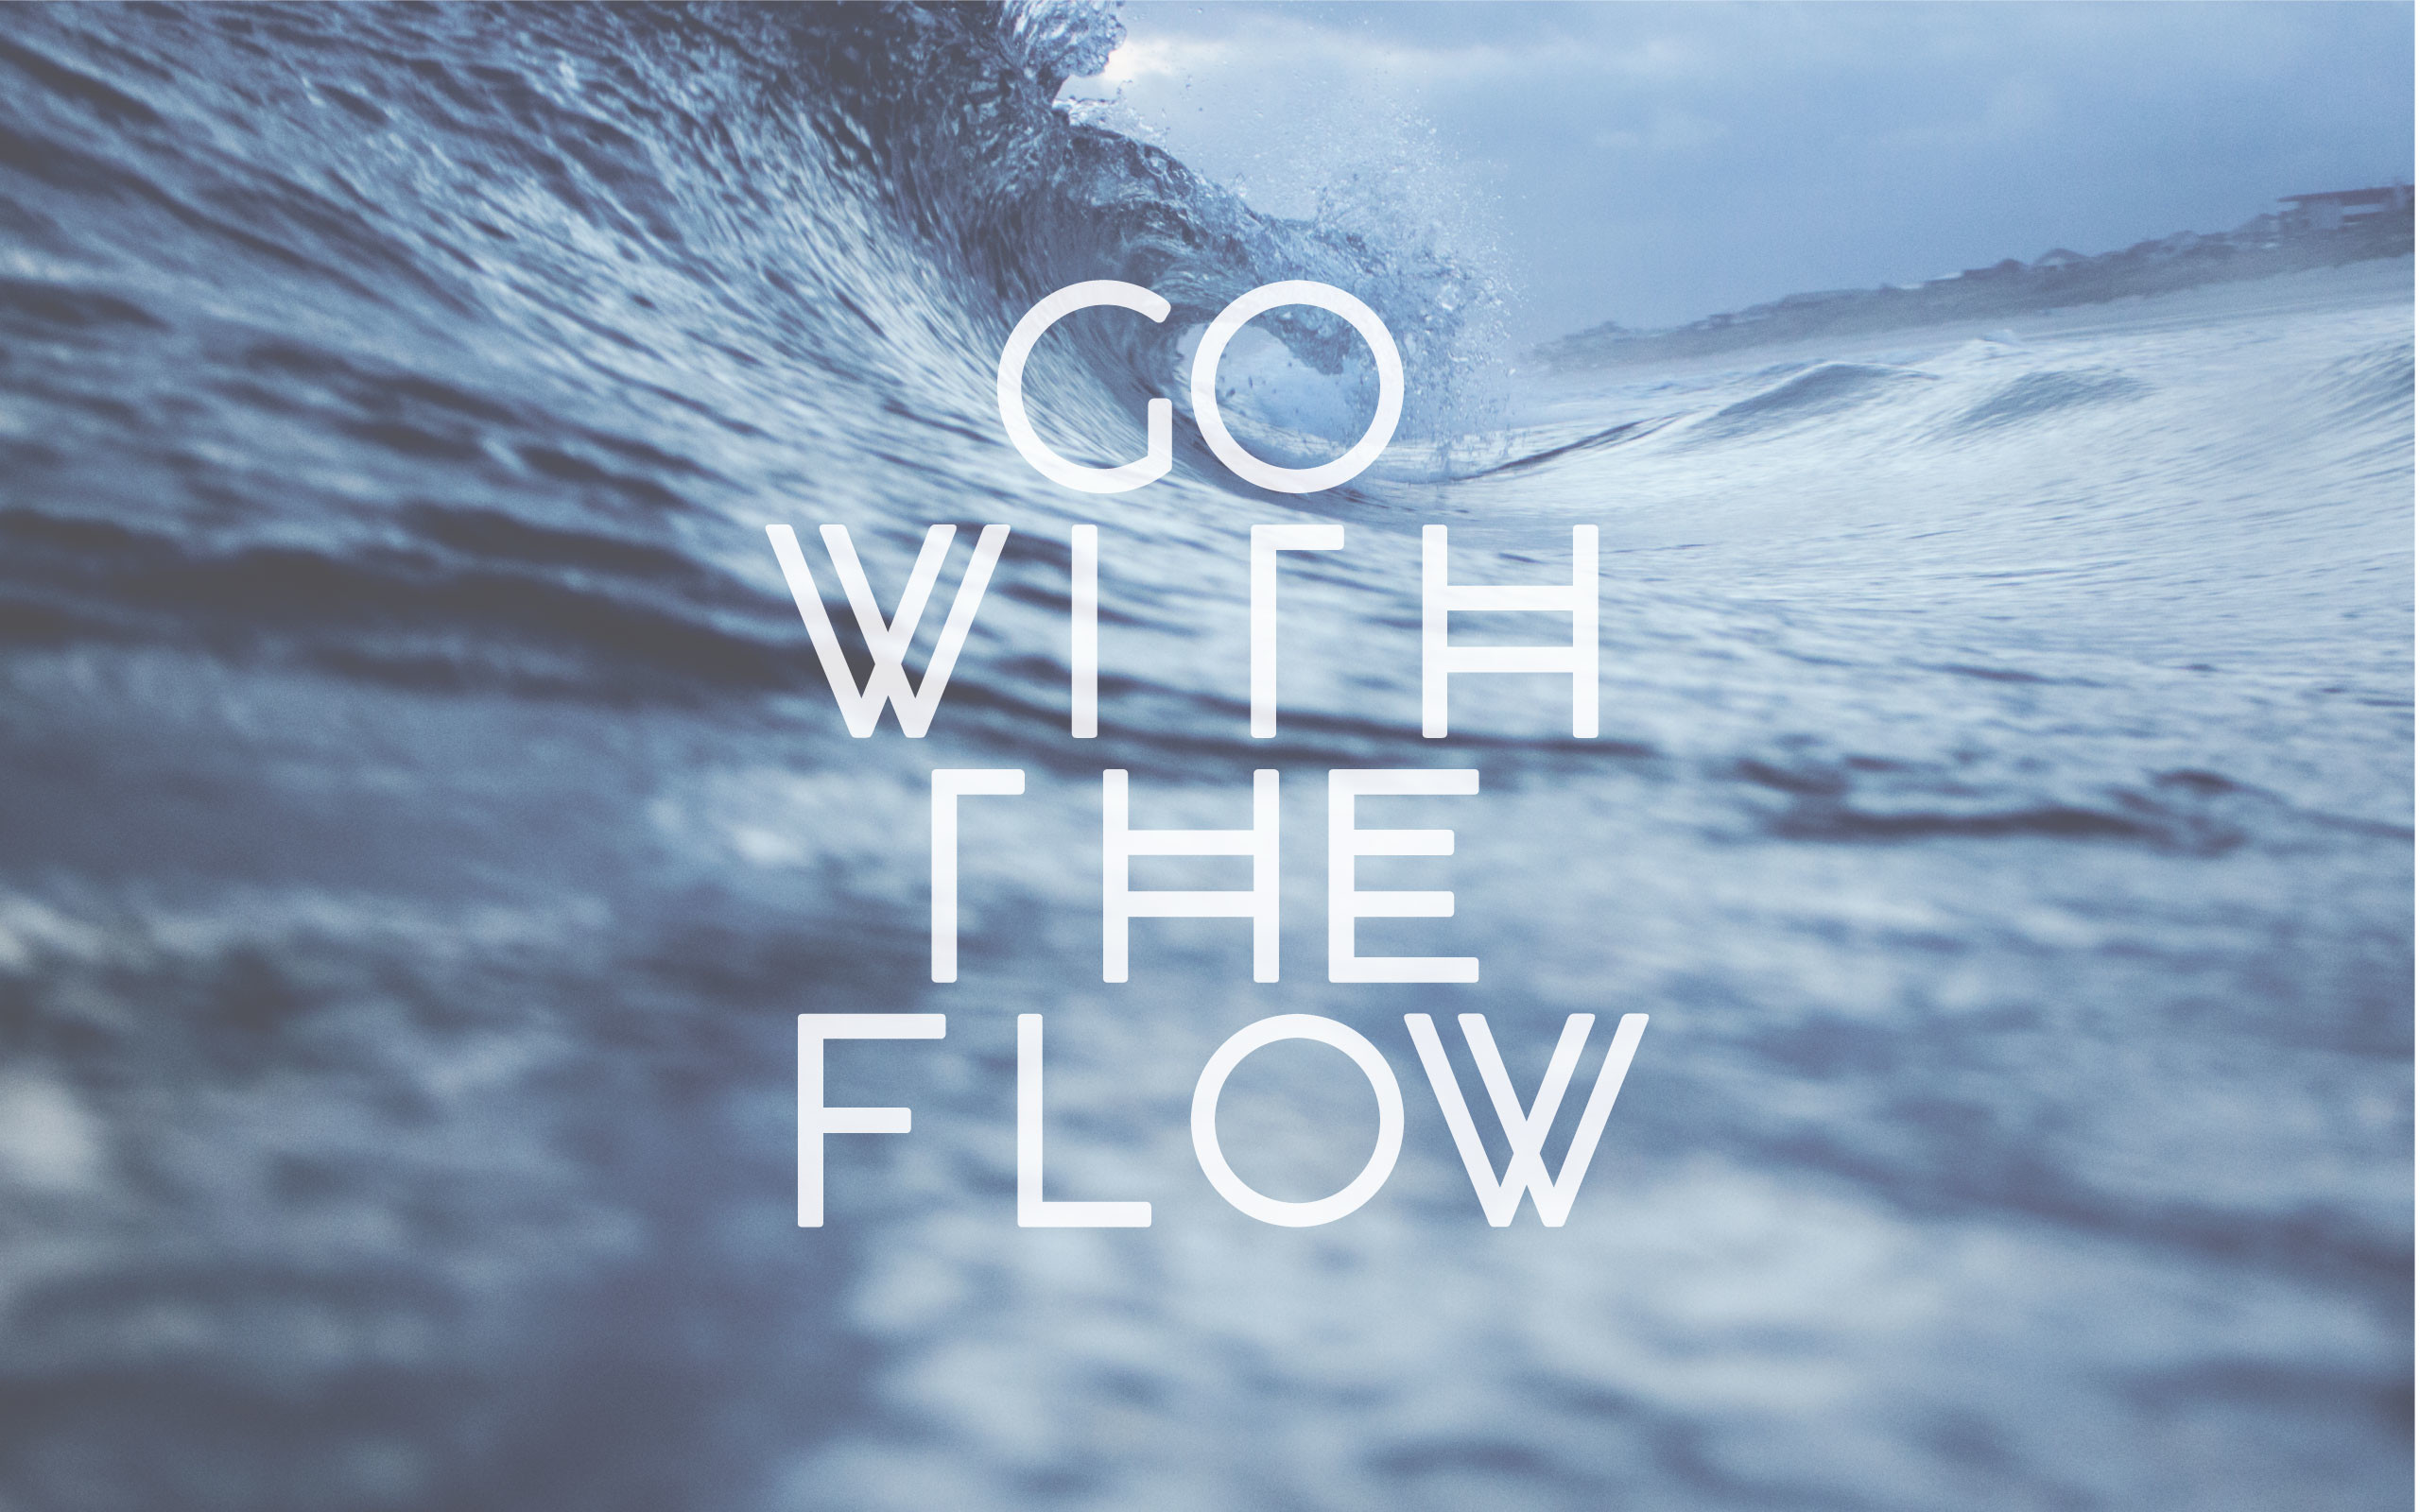 2560x1600 04 go with the flow